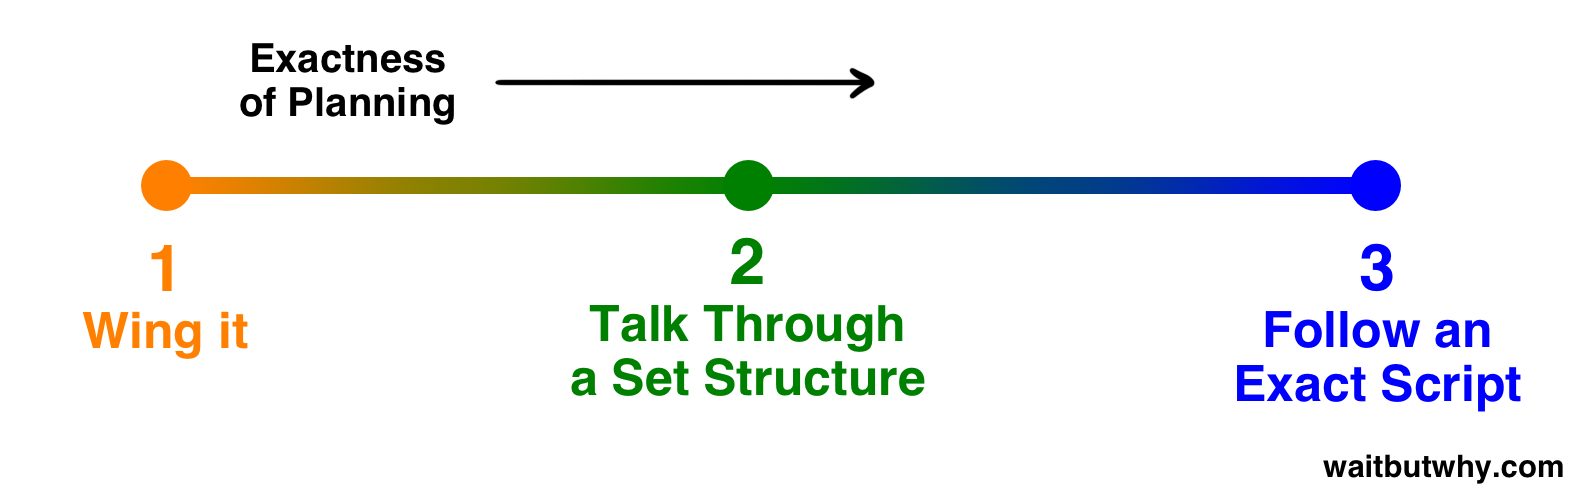 spectrum of exactness of planning: 1 wing it, 2 talk through a set structure, 3 follow an exact strict